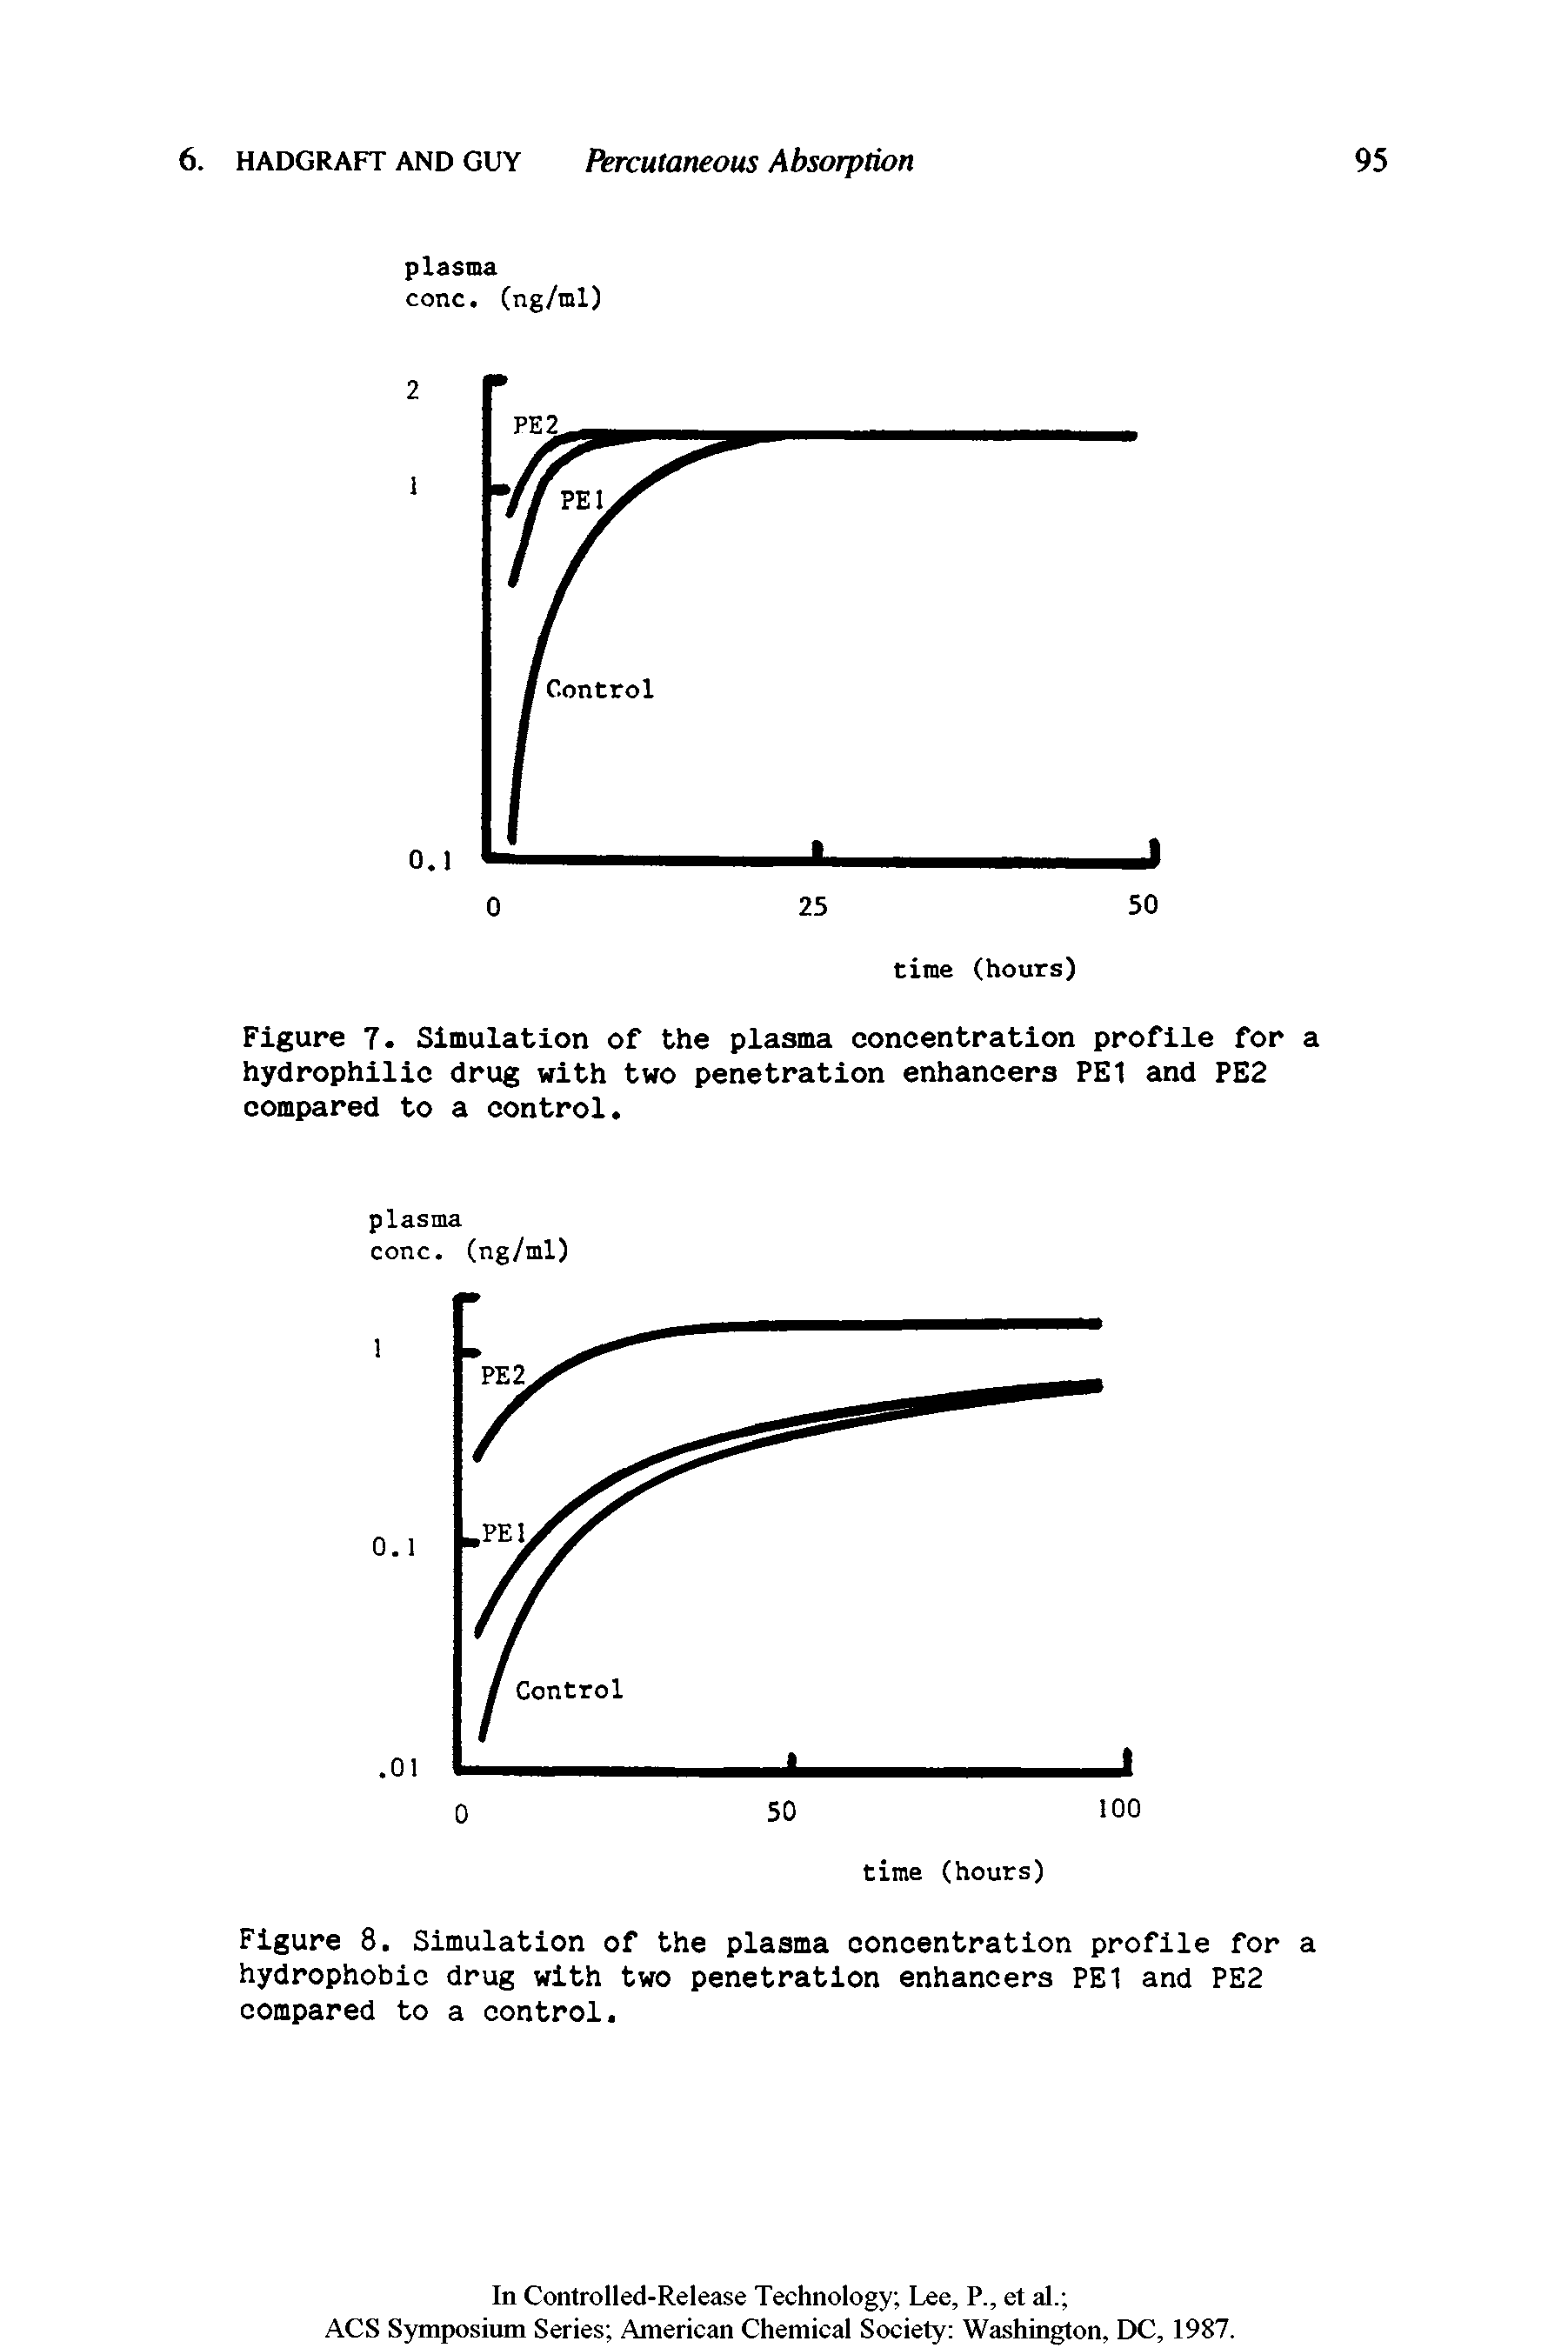 Figure 7. Simulation of the plasma concentration profile for a hydrophilic drug with two penetration enhancers PE1 and PE2 compared to a control.